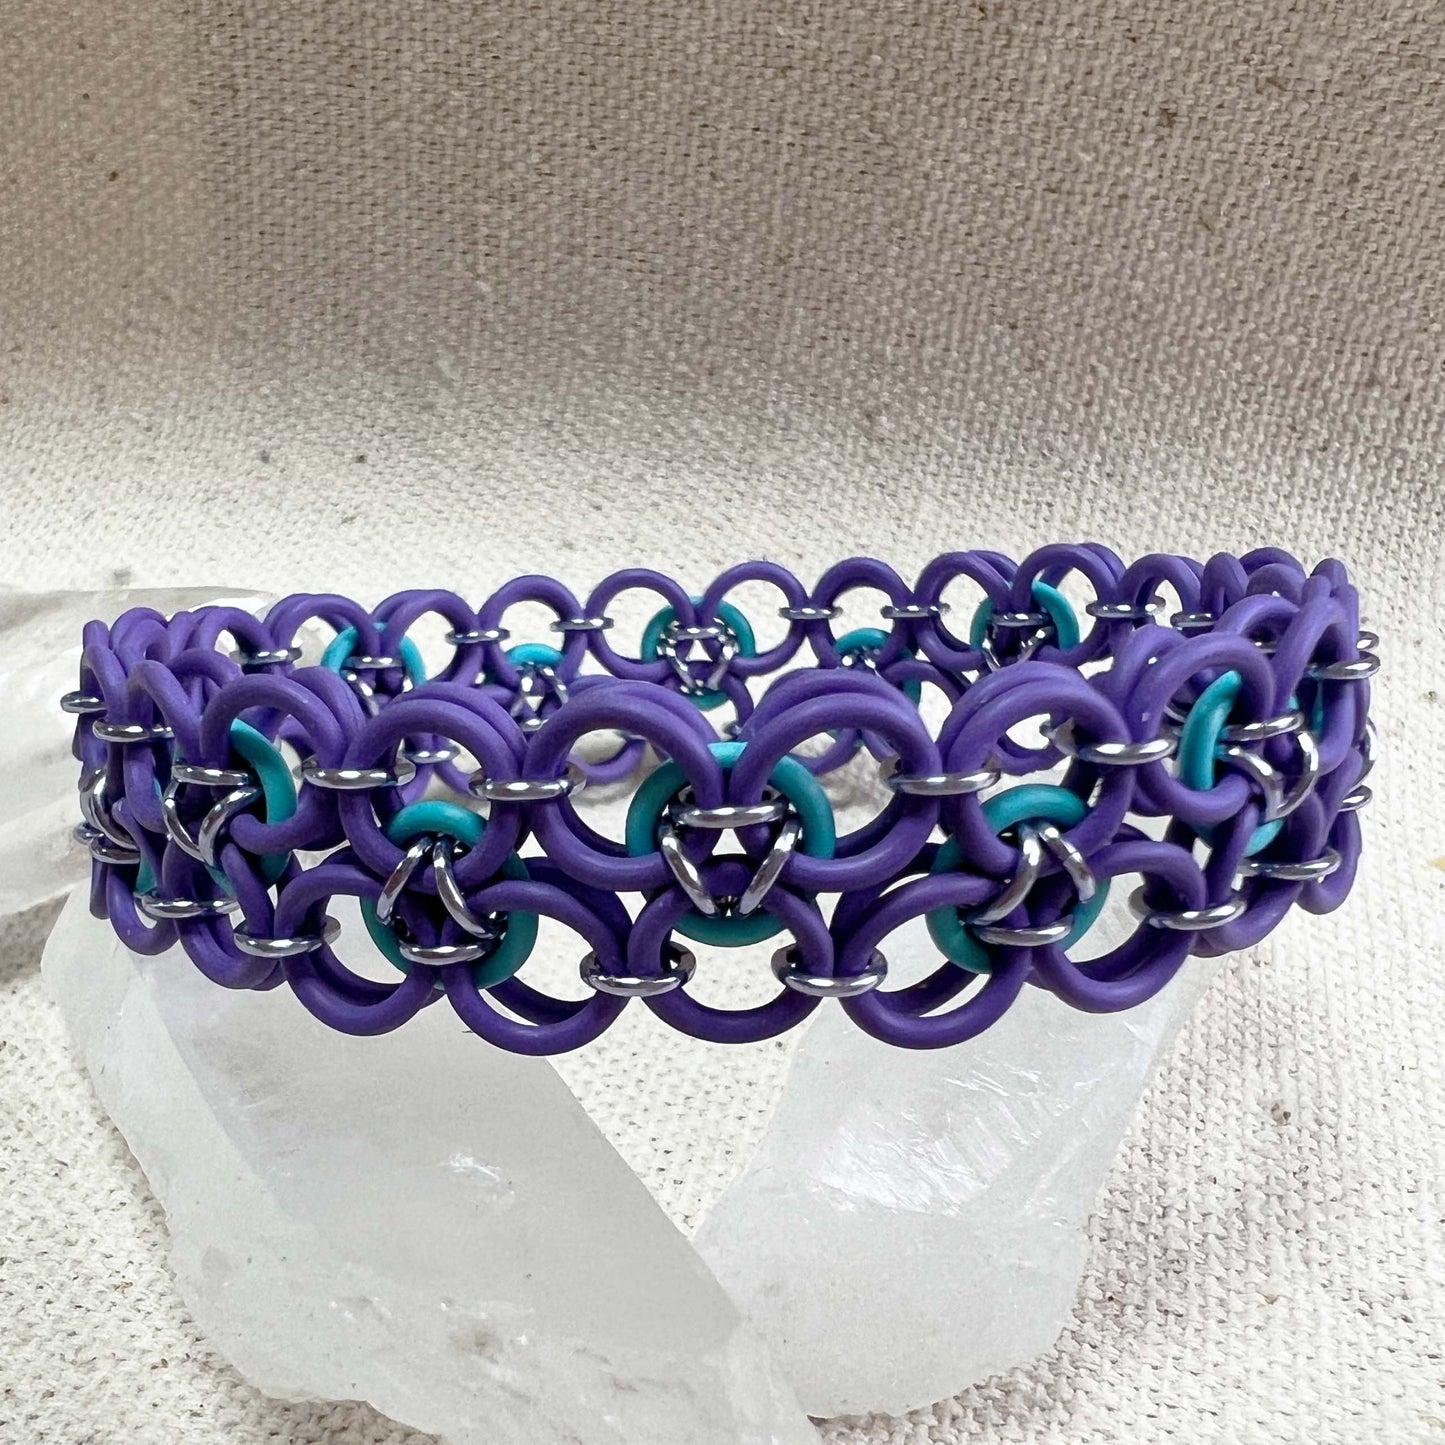 Oriental Scale Stretch Bracelet Kit with FREE video - Purple and Turquoise